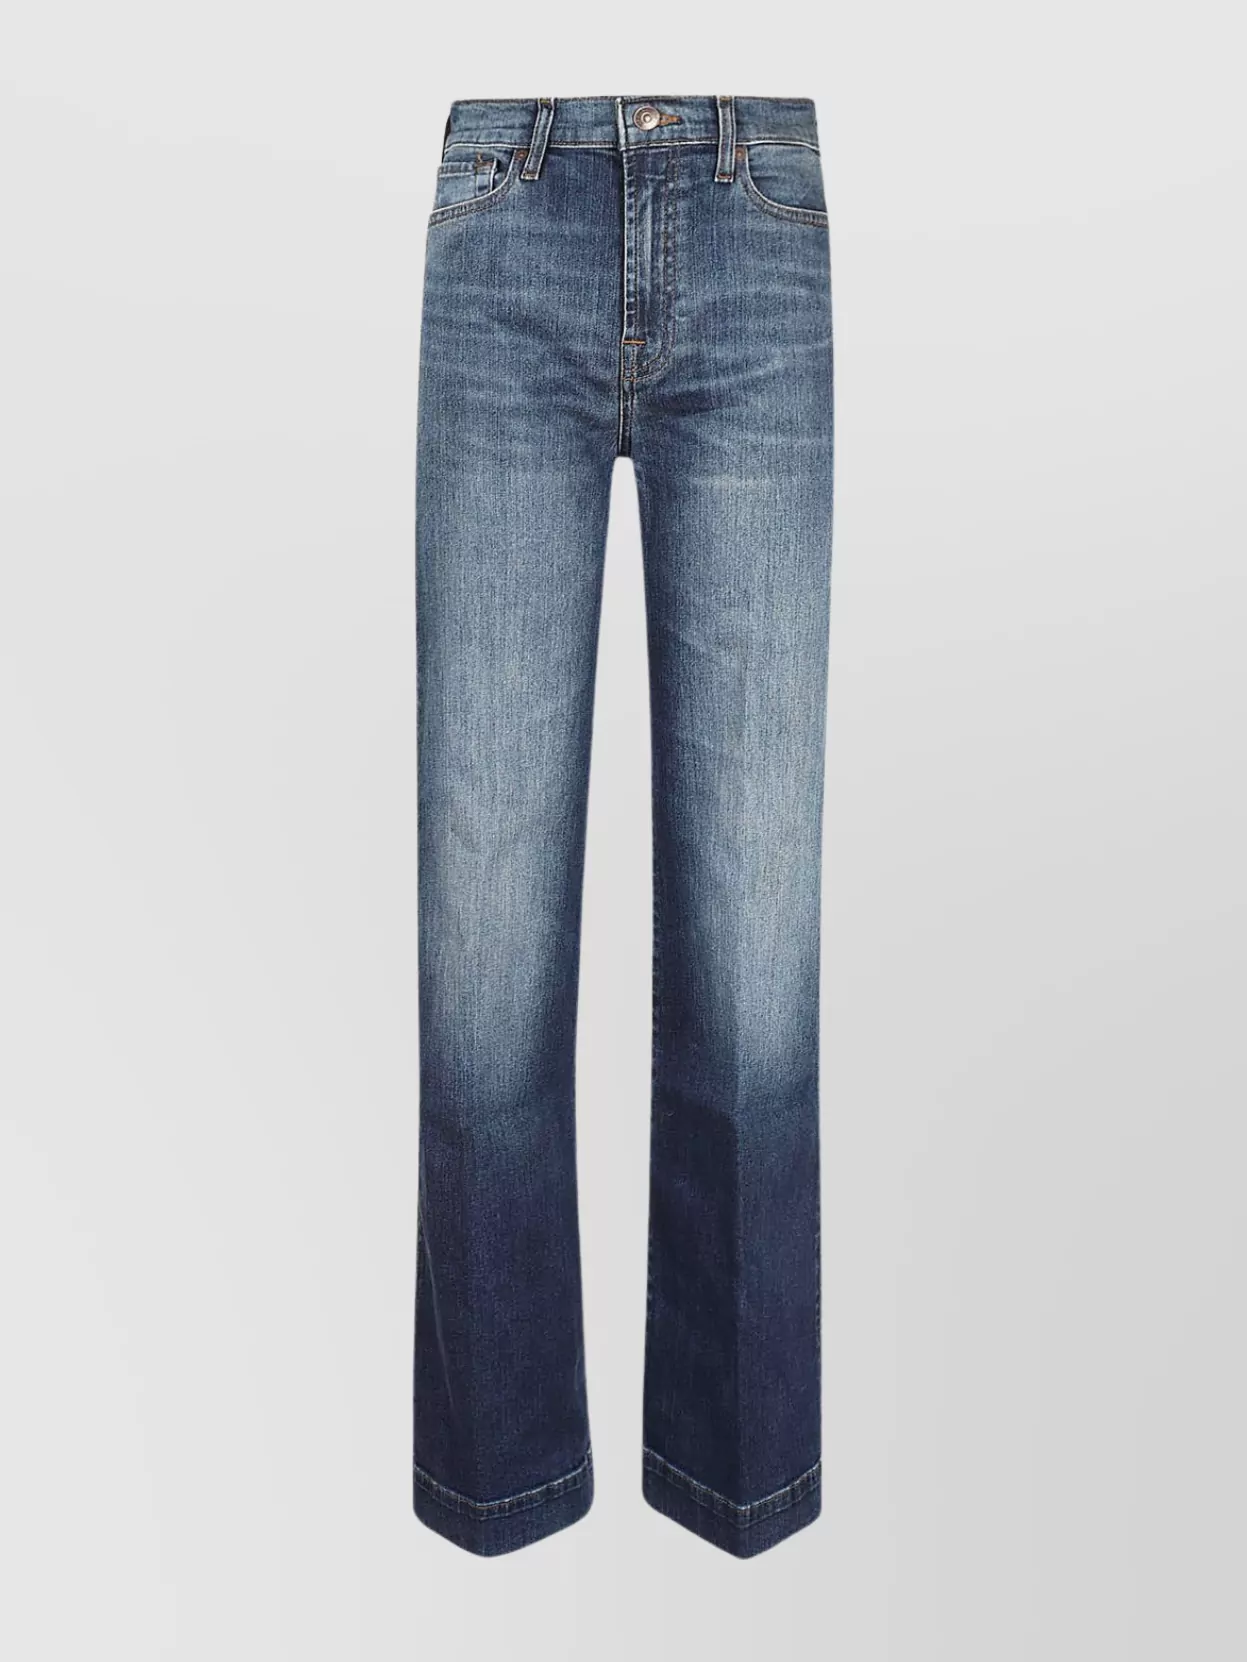 Shop 7 For All Mankind Modern Denim Trousers With Retro Stitching